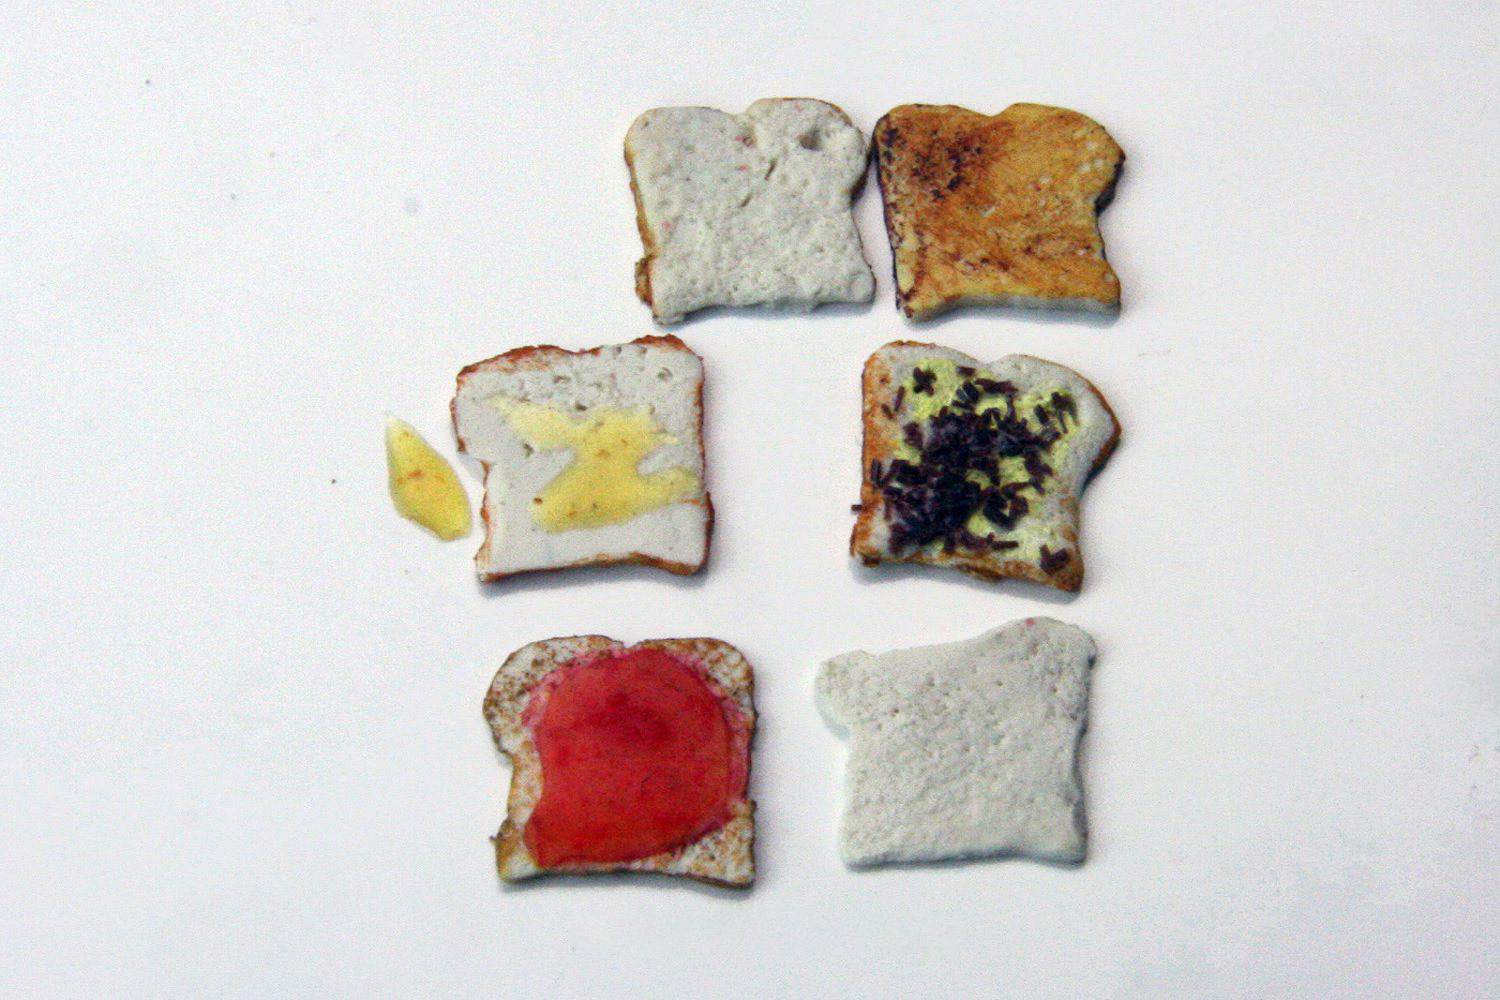 Different bread slices with toppings in doll size